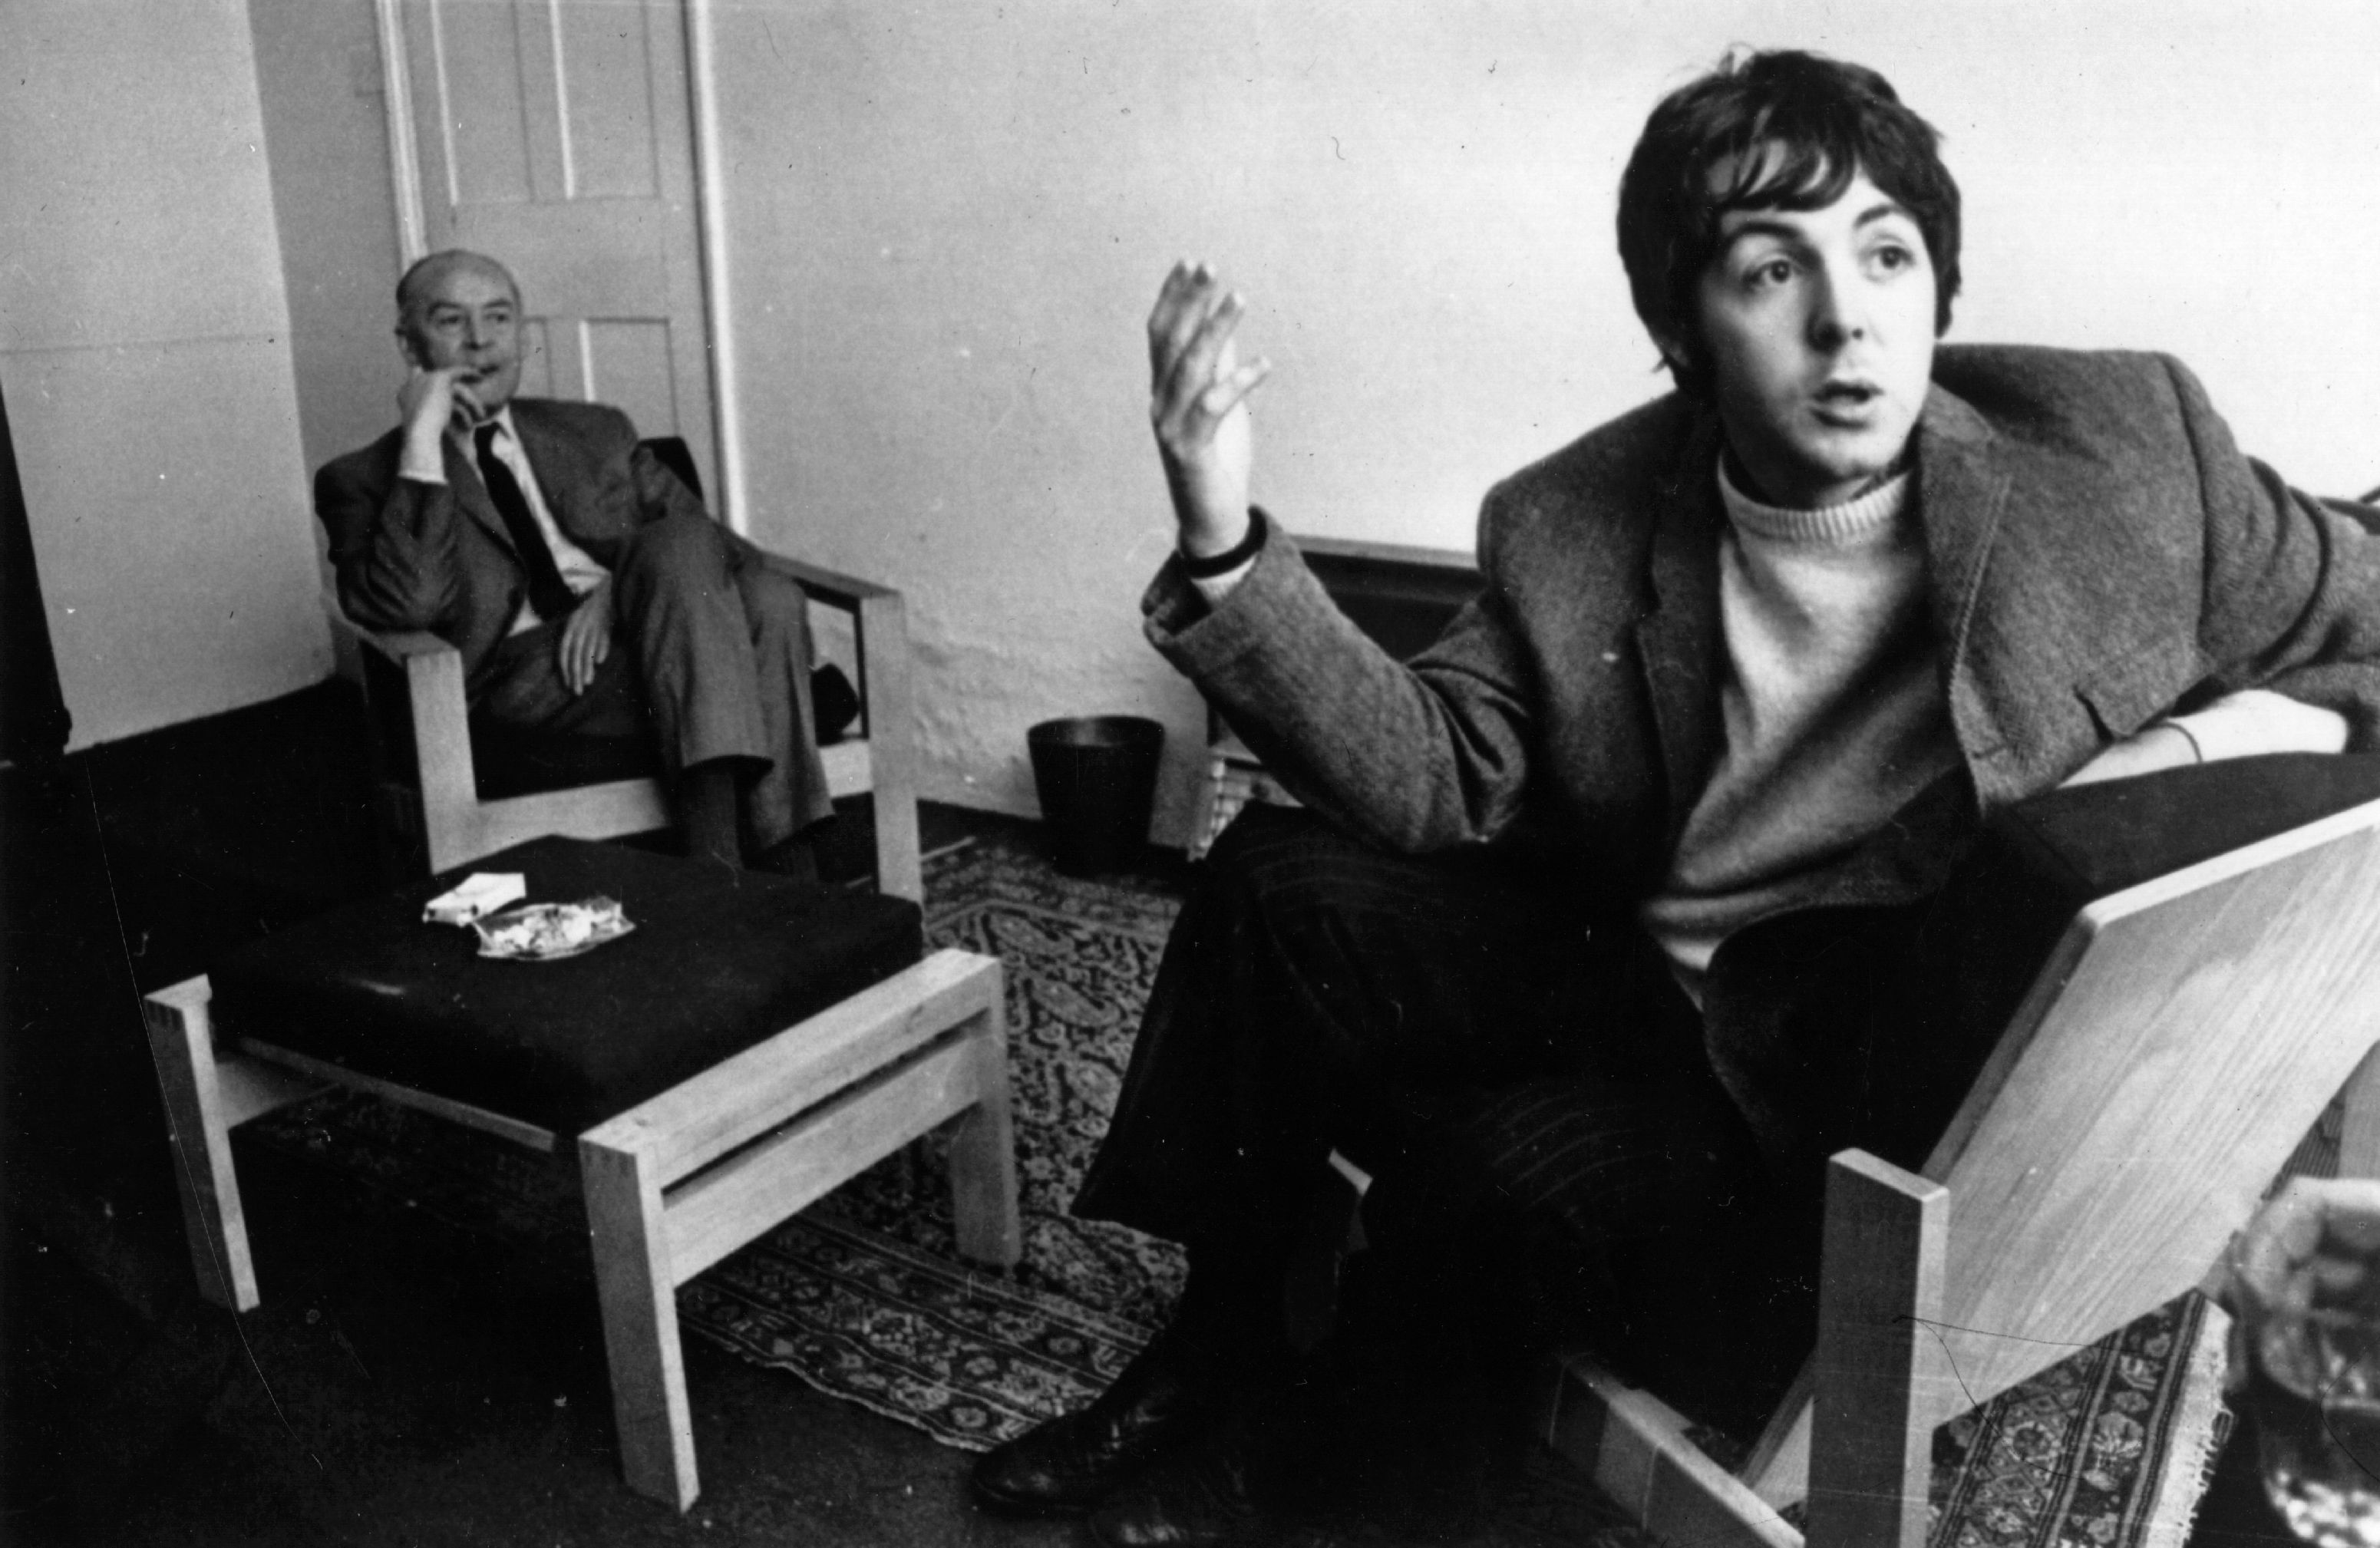 Paul McCartney and his father, James McCartney, sitting near a coffee table